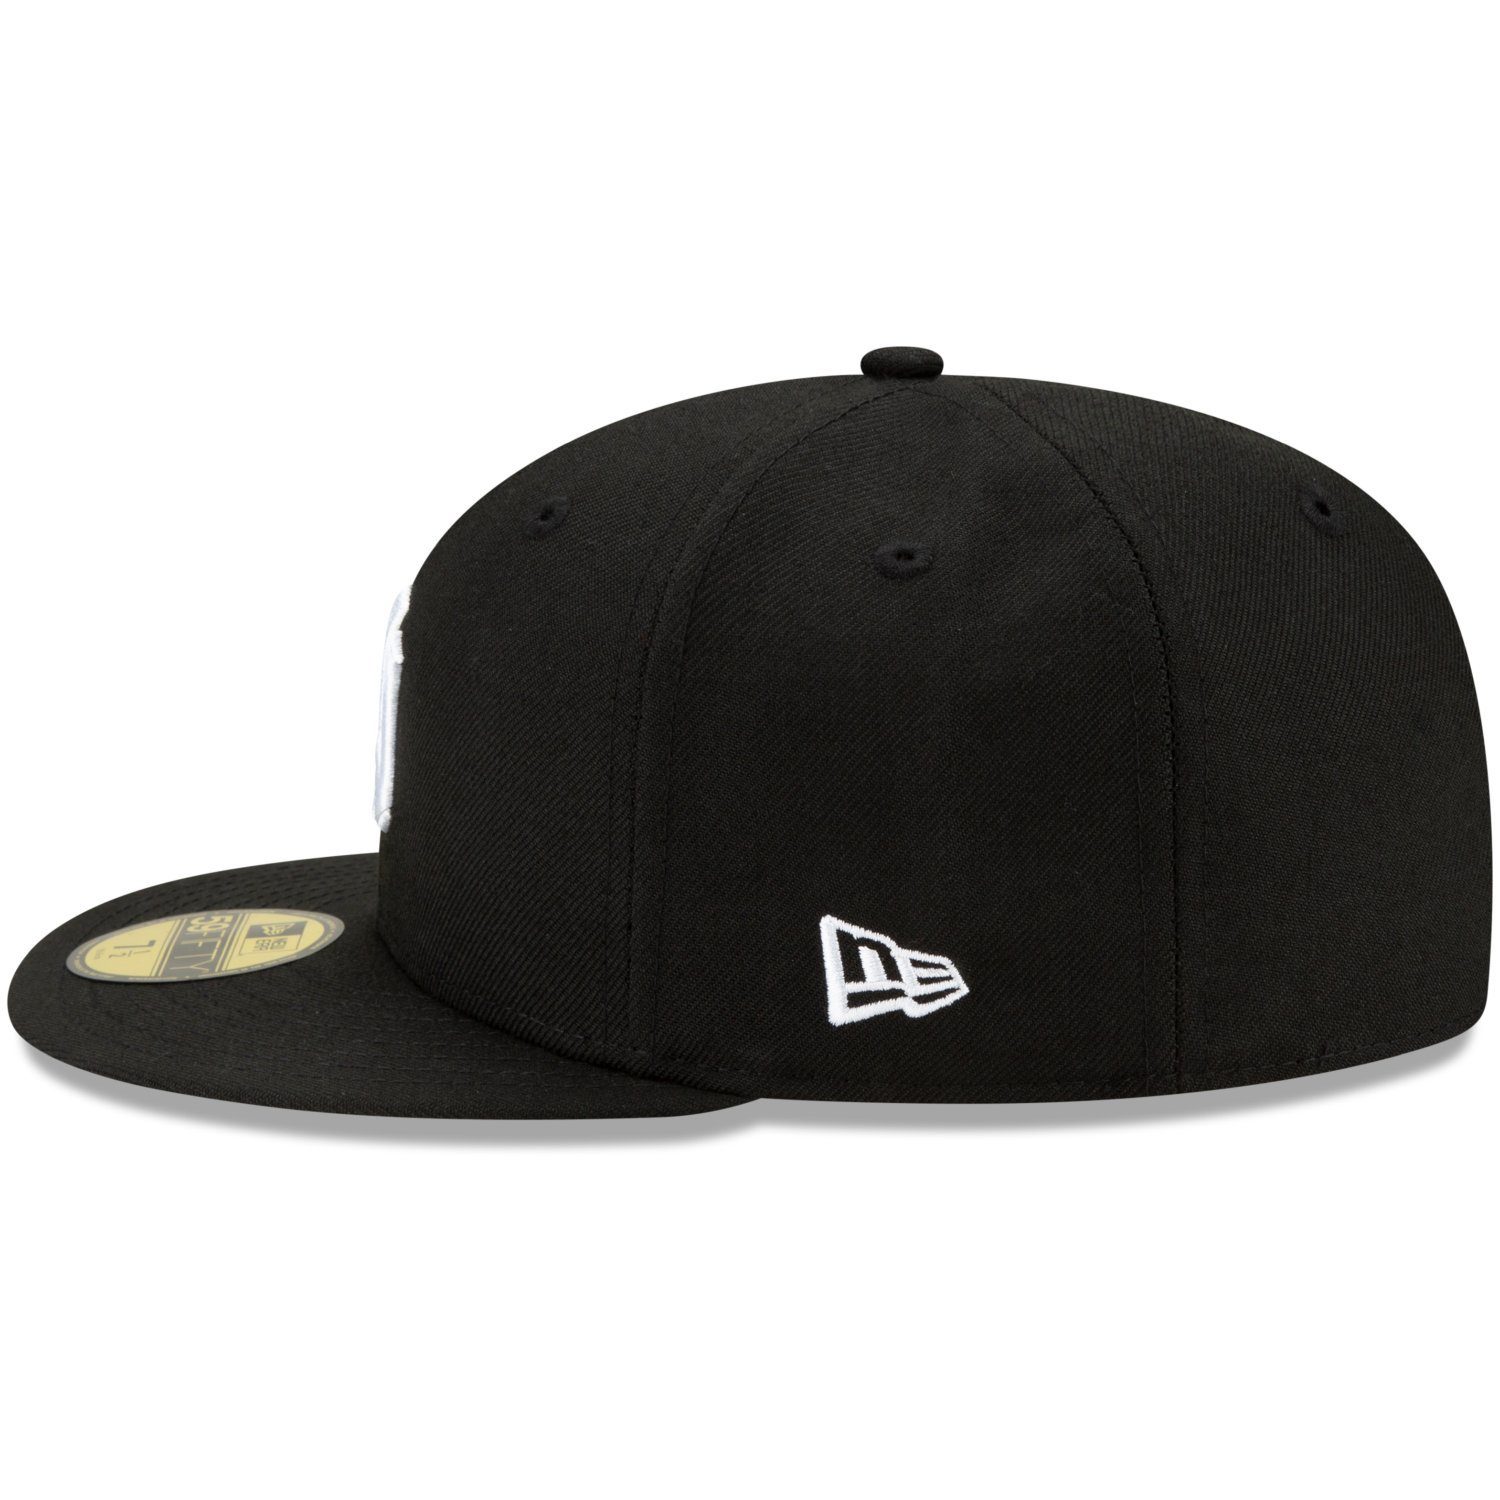 New Era Fitted Cap LIFESTYLE New York Yankees 59Fifty